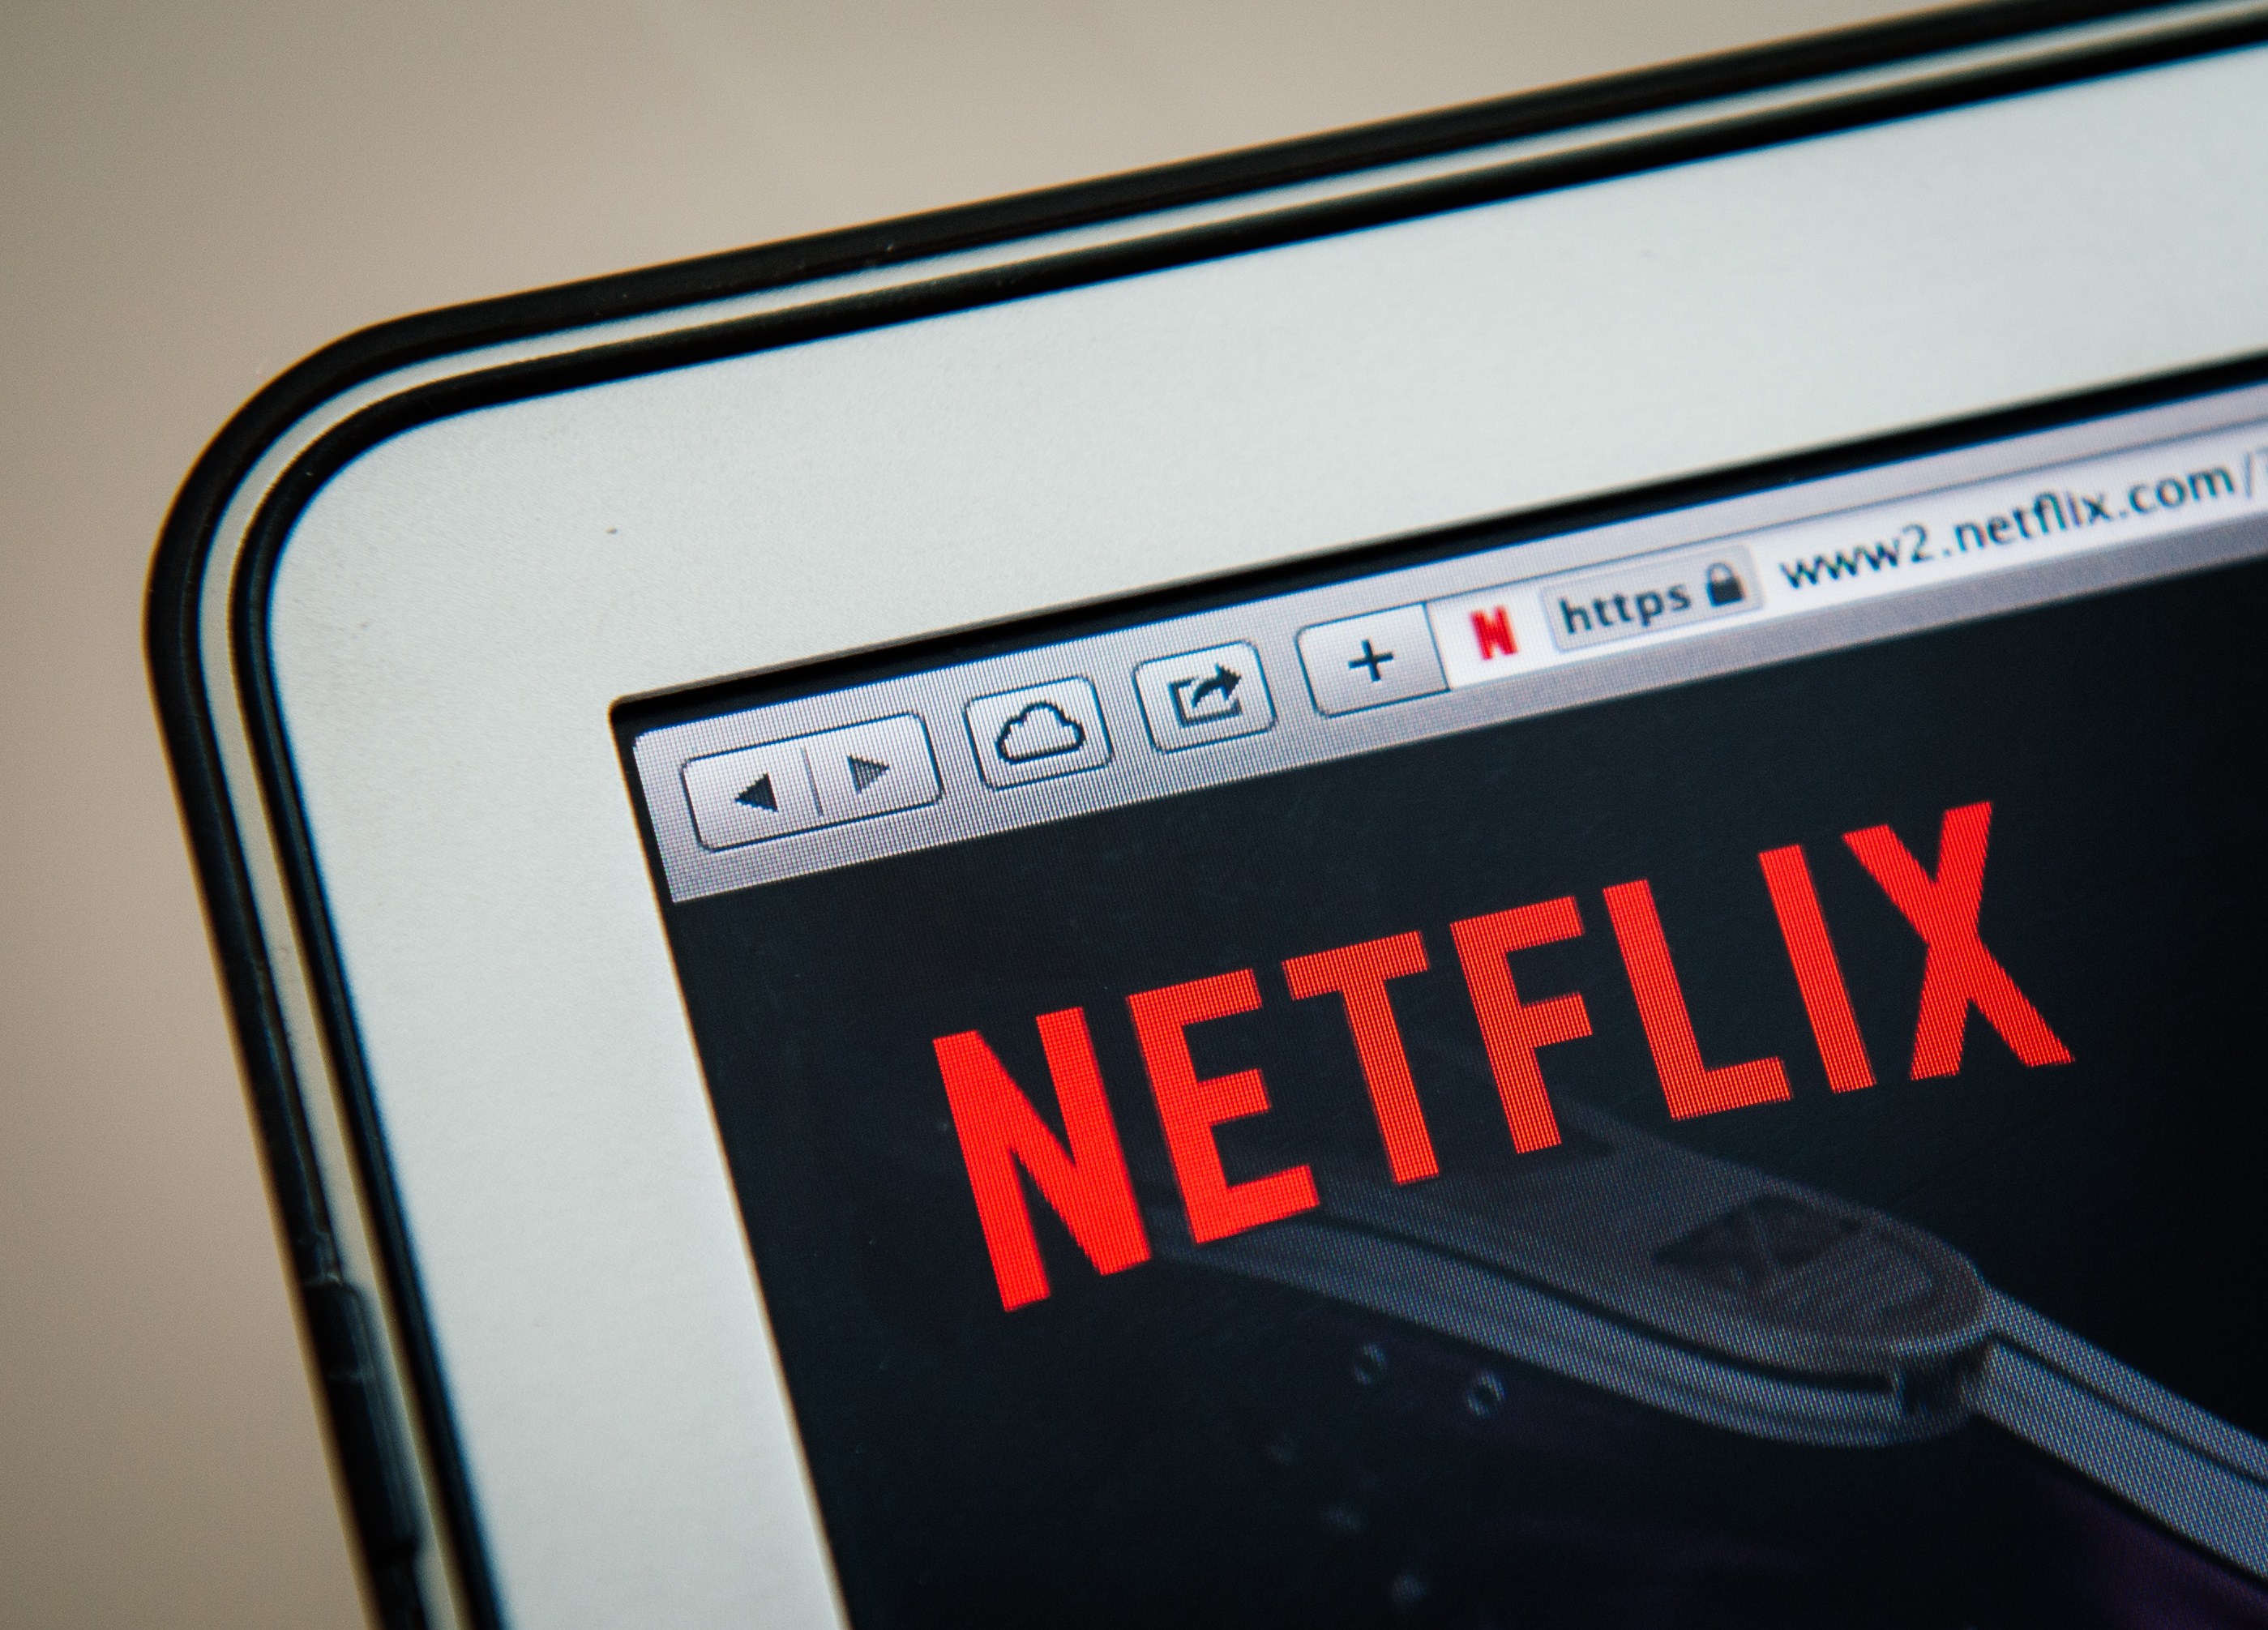 This picture taken on September 11, 2014 shows the on-demand internet streaming media provider, Netflix, on a laptop screen in Stockholm. (JONATHAN NACKSTRAND&mdash;AFP/Getty Images)